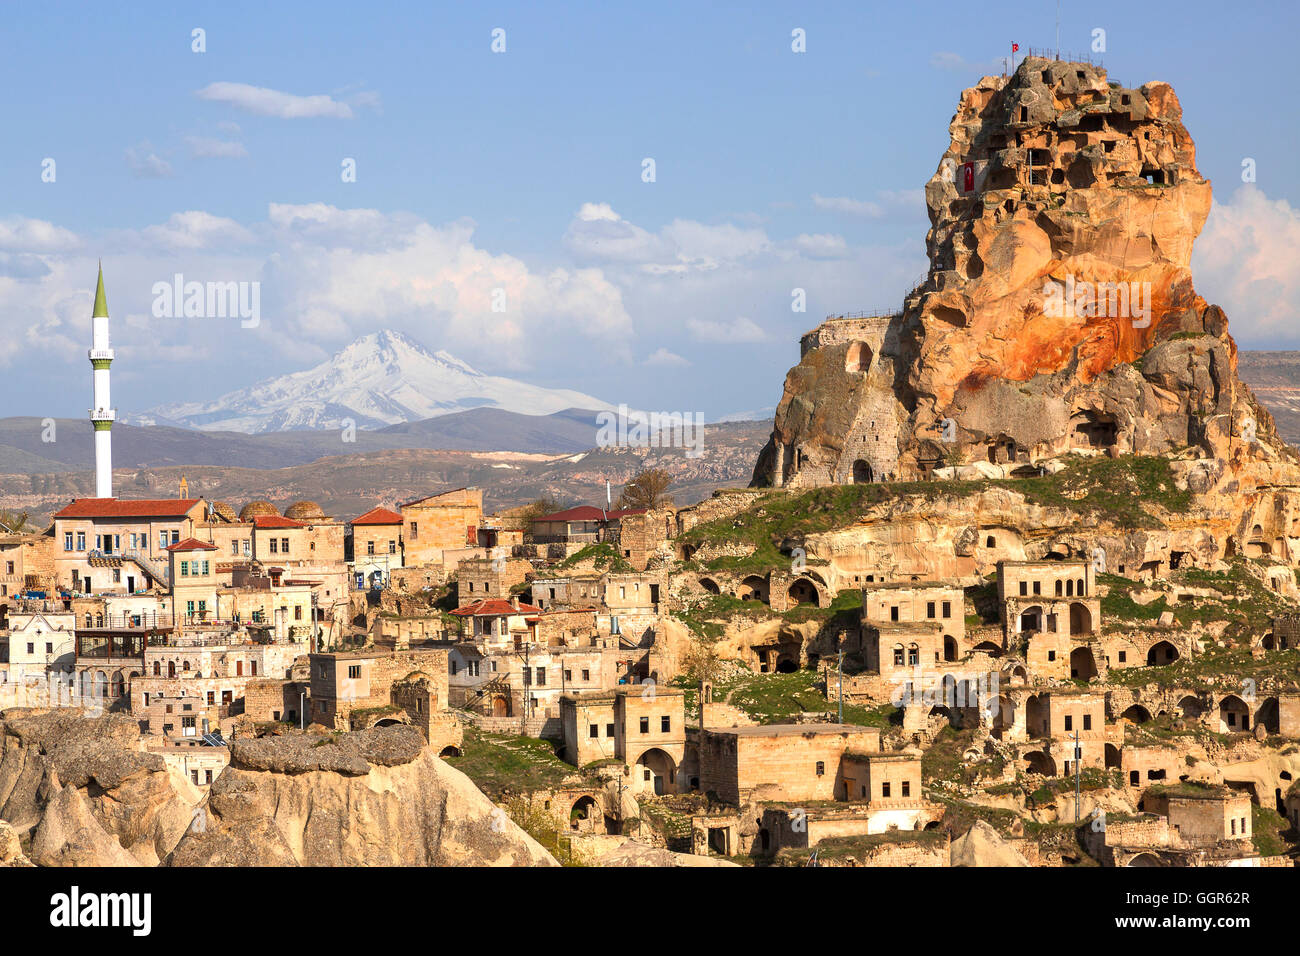 Town Ortahisar in Cappadocia with the extinct volcano Erciyes in the background. Stock Photo